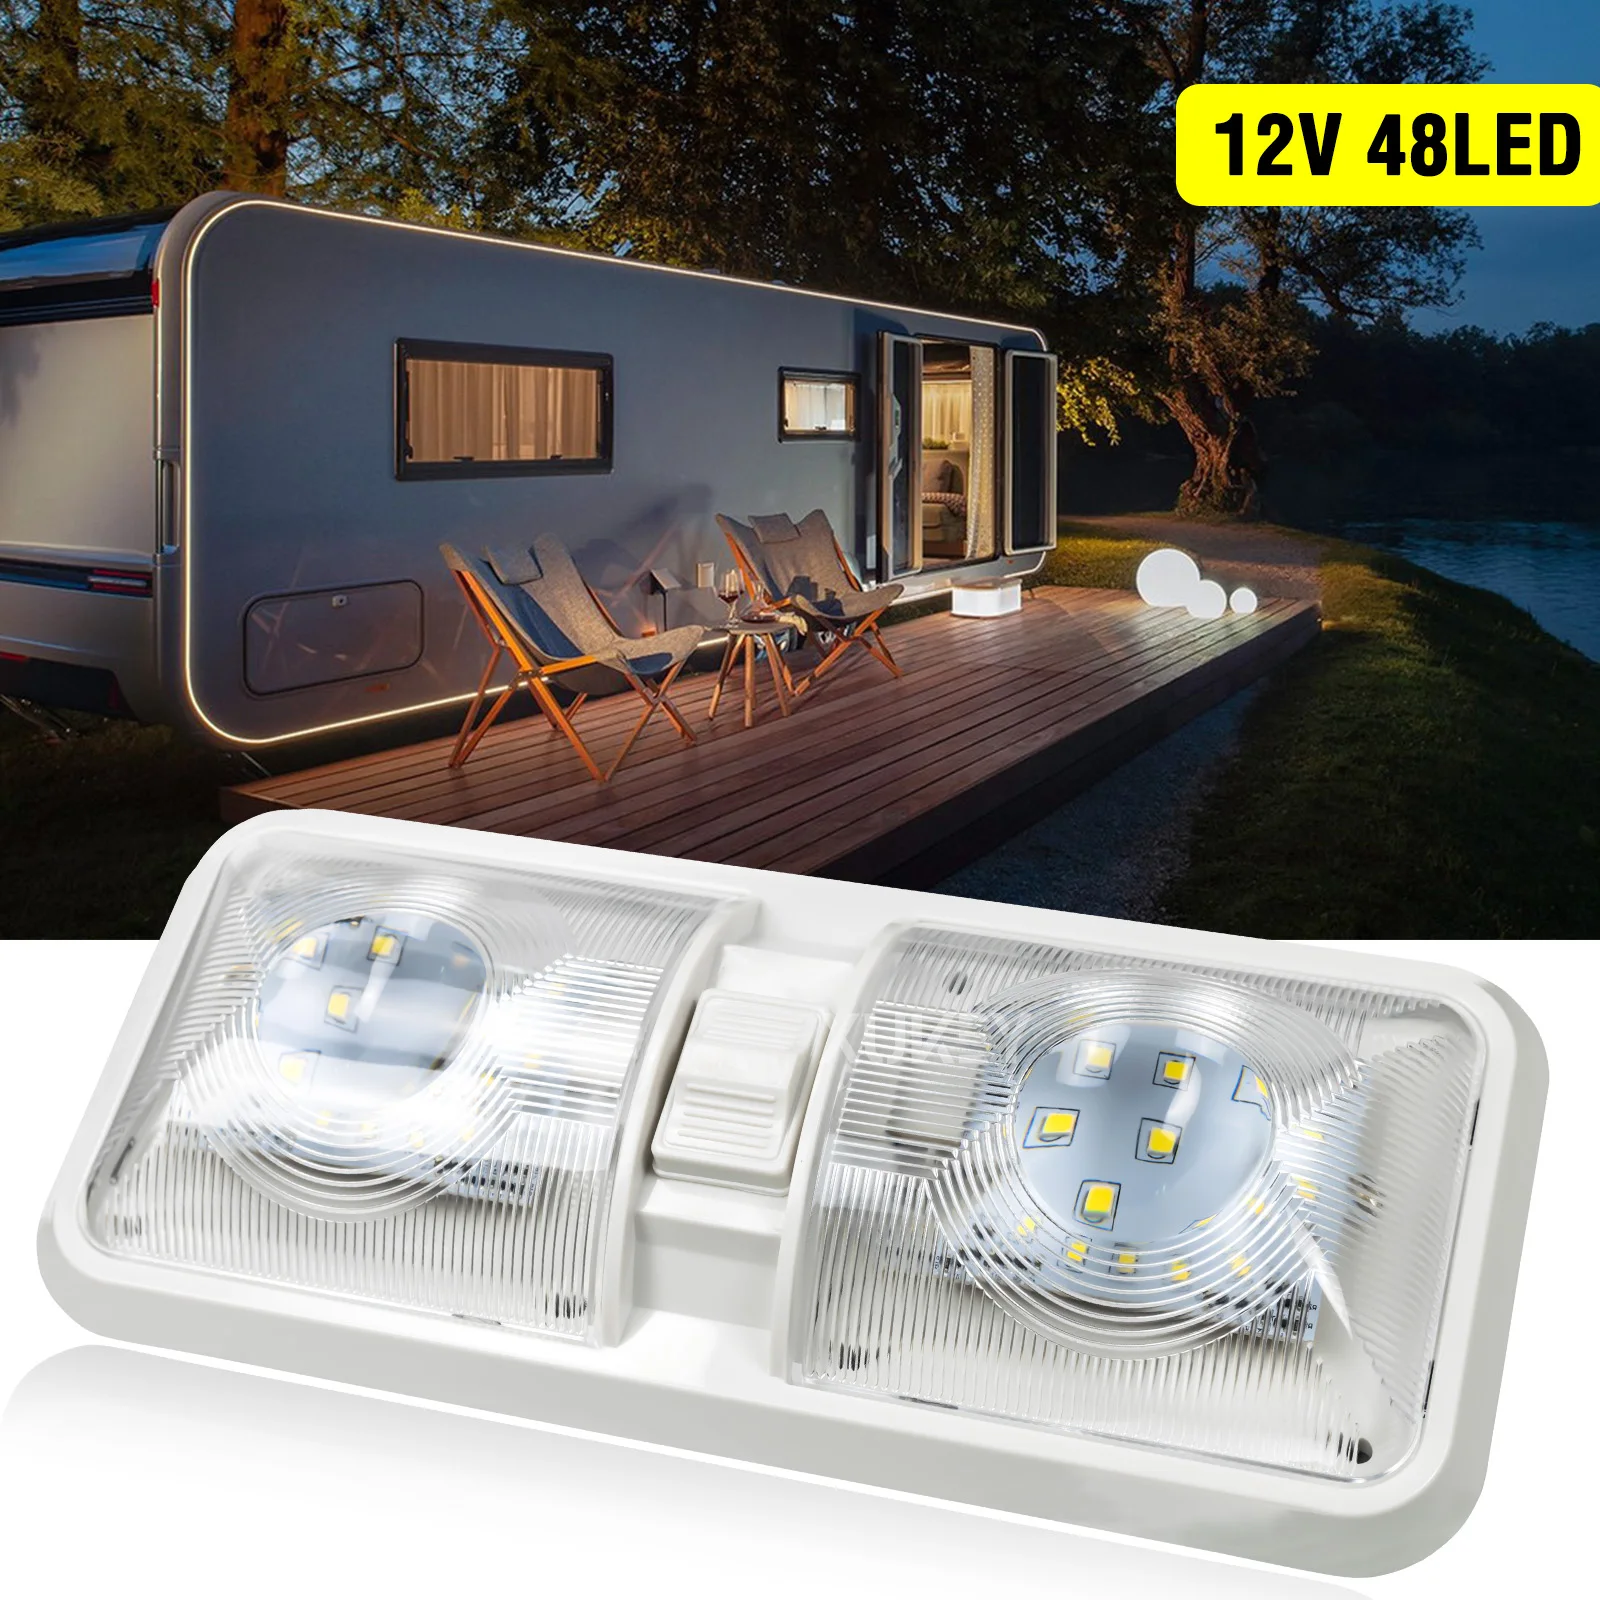 

12V 48LED 2835 SMD Interior Double Dome Ceiling Light Cabin Roof Lamp For RV Boat Camper Trailer Caravan Lorry Bus Motorhome